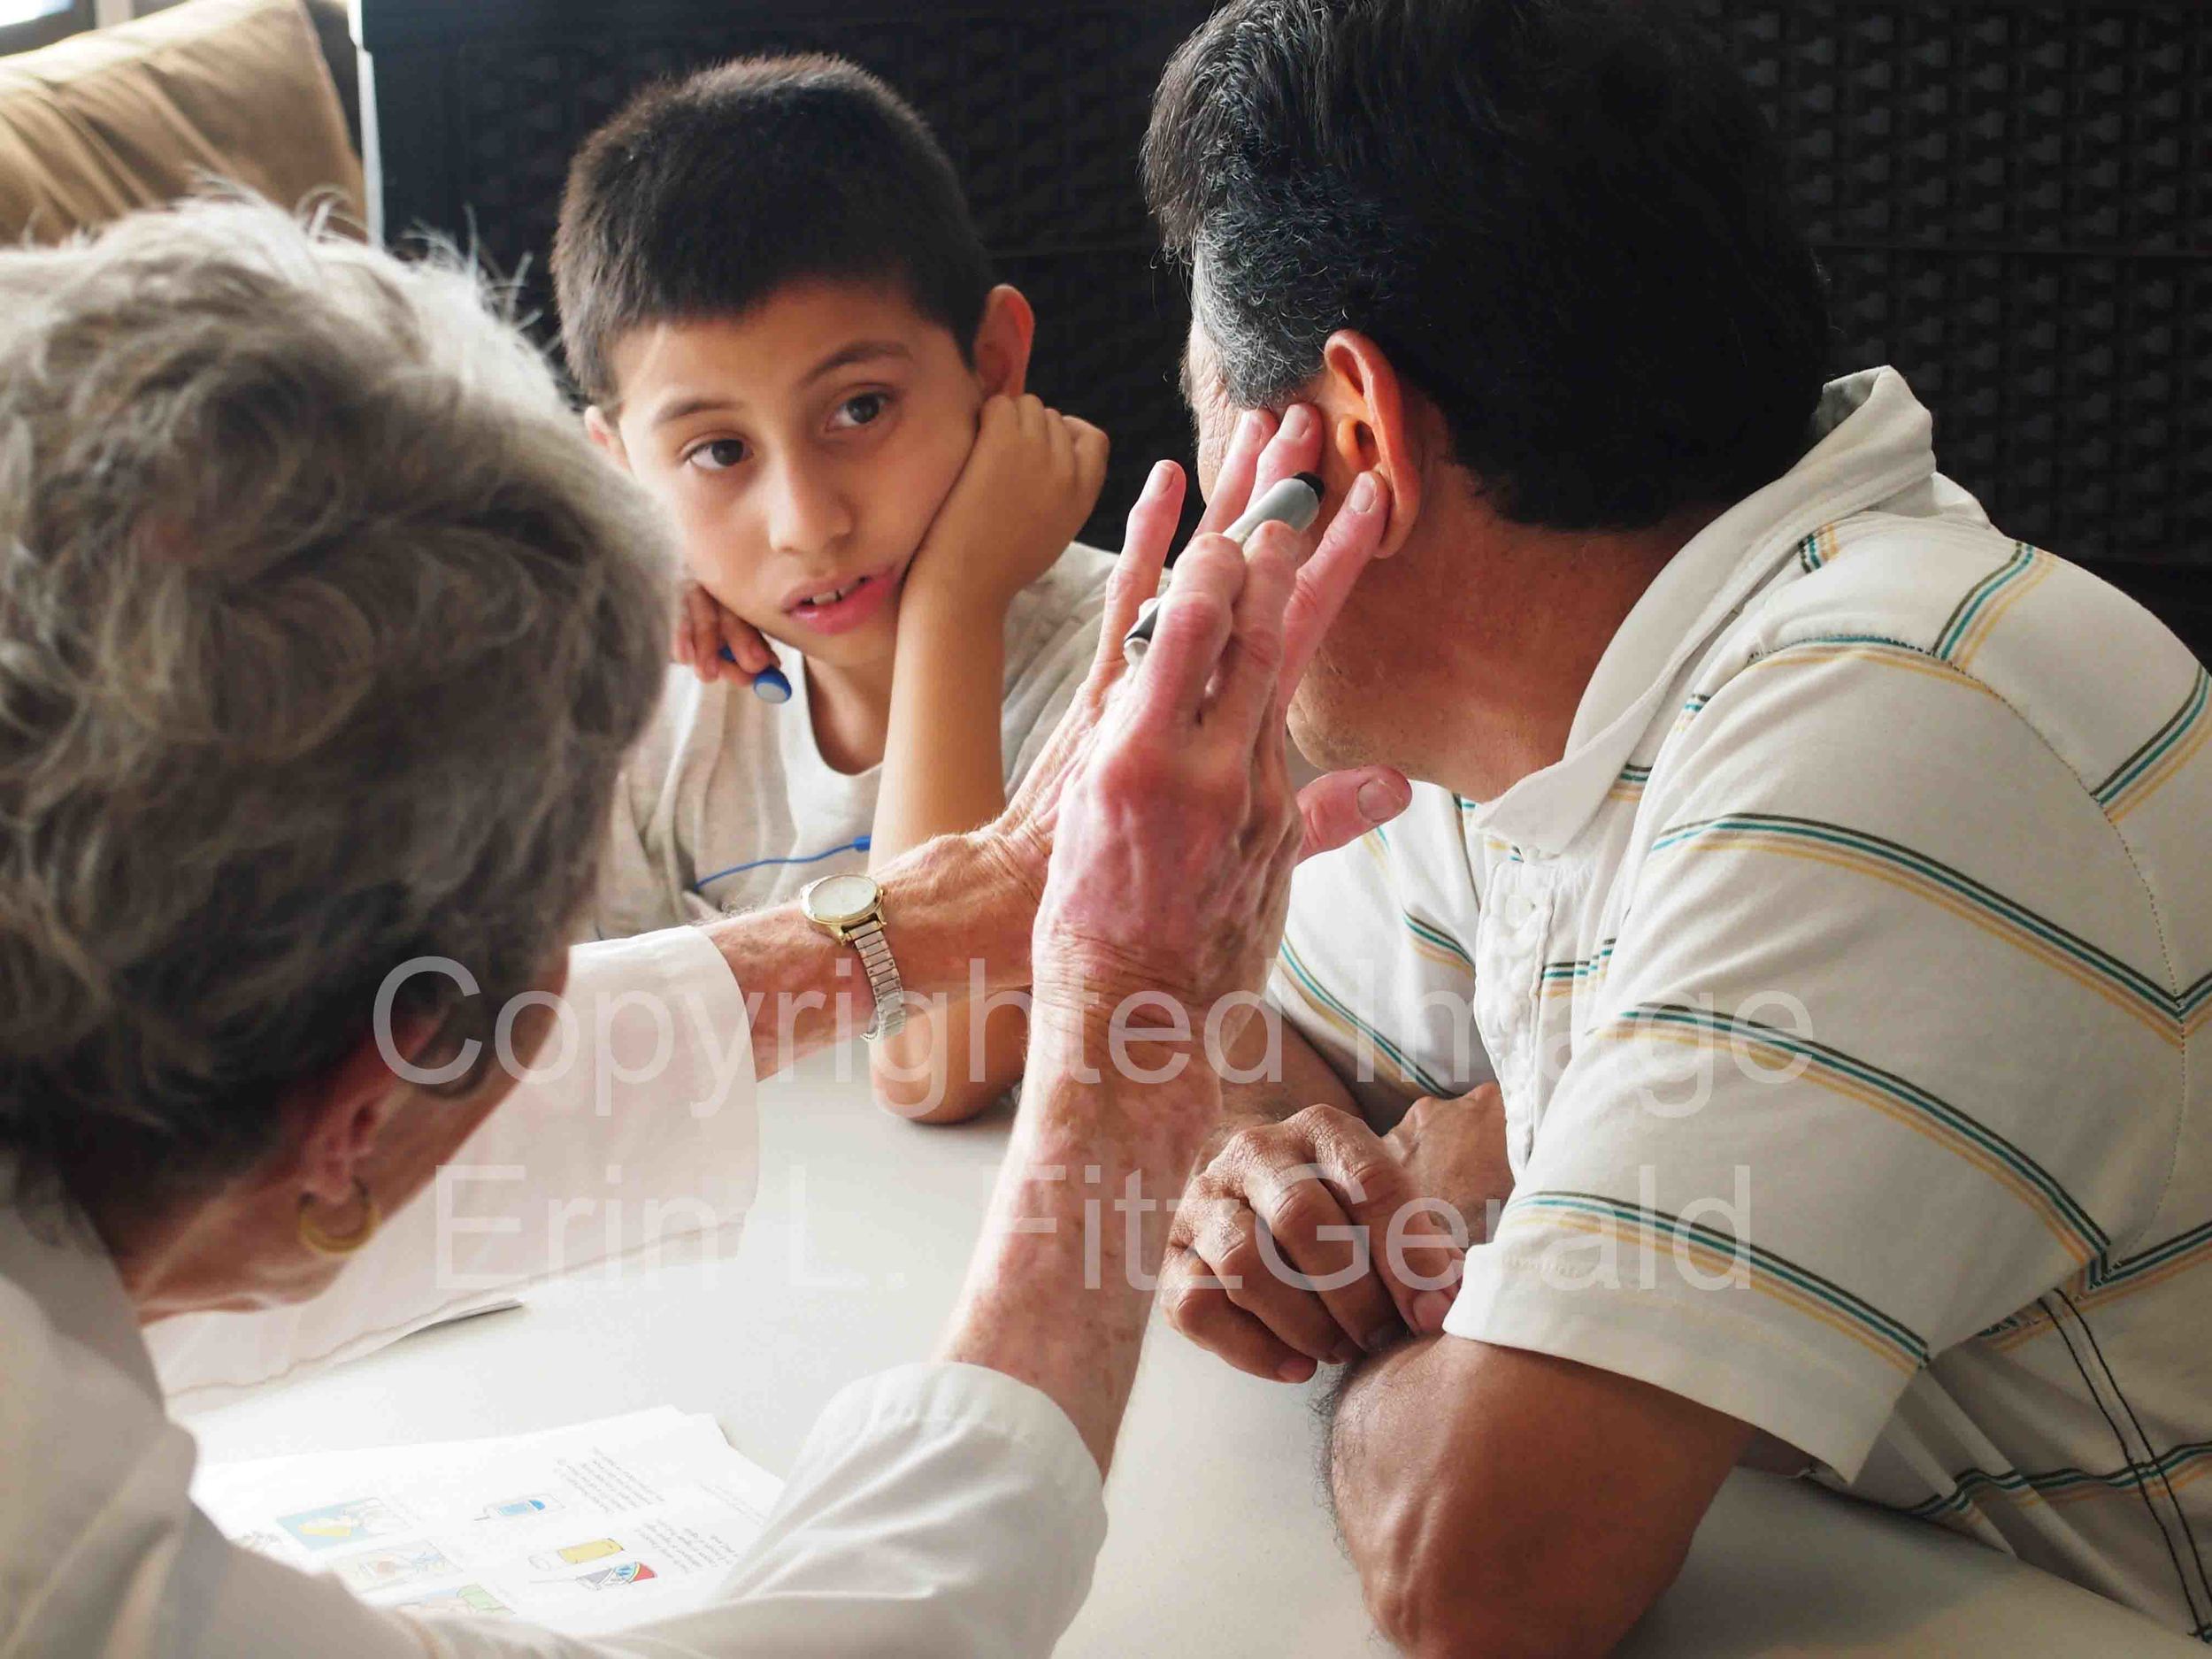   A son watches his father receive a free health screening in Santa Monica, California. The screenings were part of CNA's Medicare-for-All tour that included town hall discussions about healthcare access.  